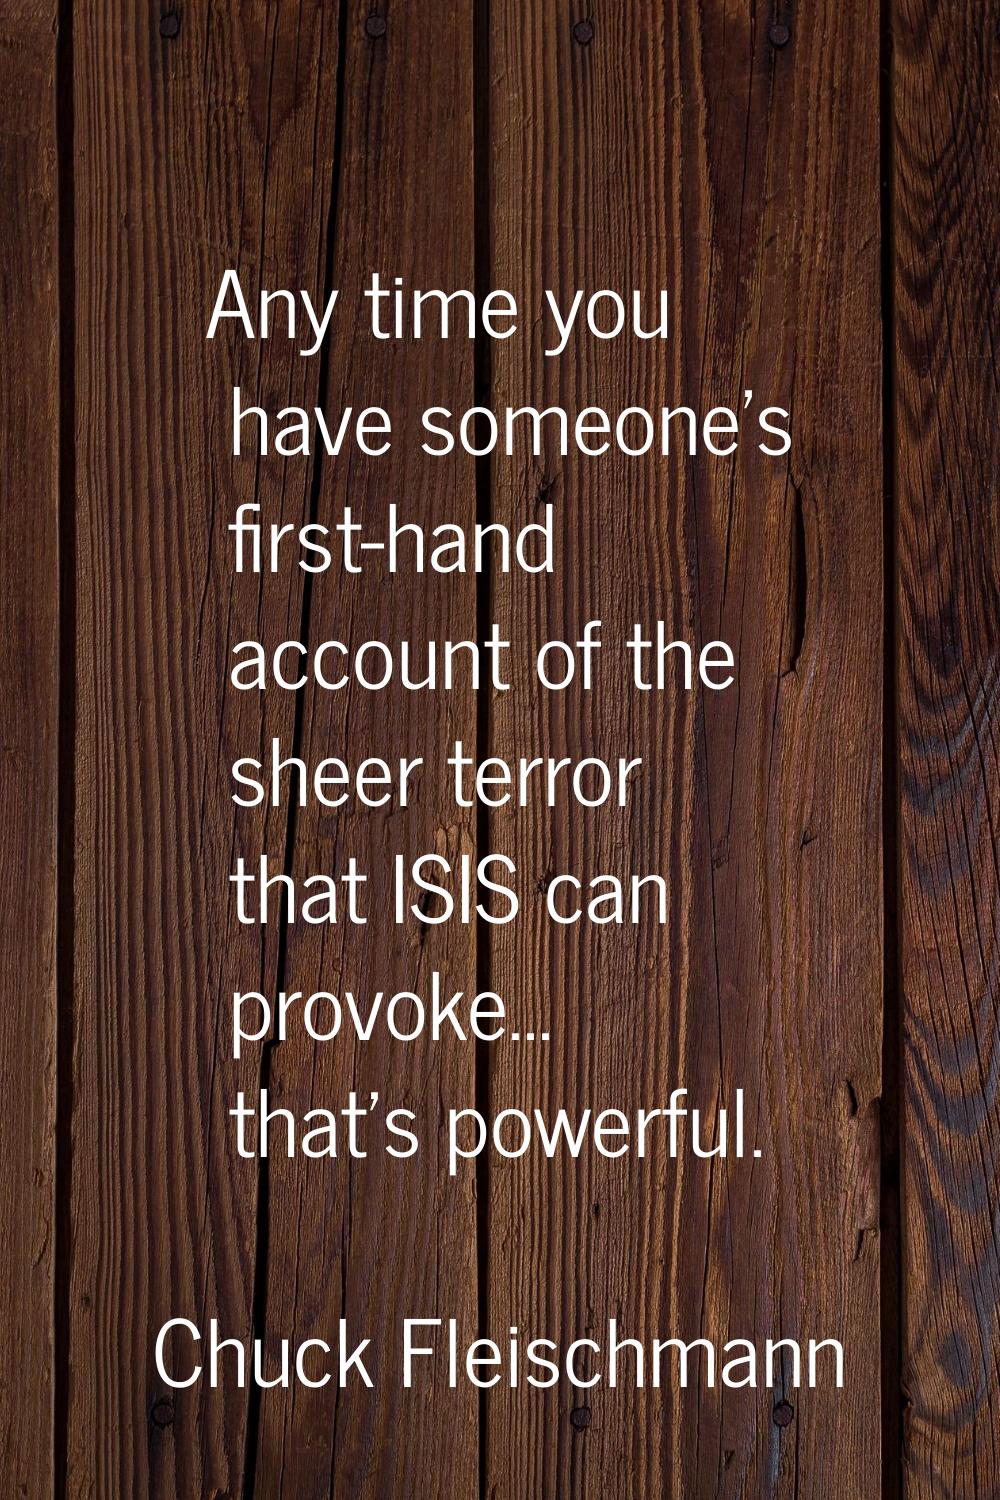 Any time you have someone's first-hand account of the sheer terror that ISIS can provoke... that's 